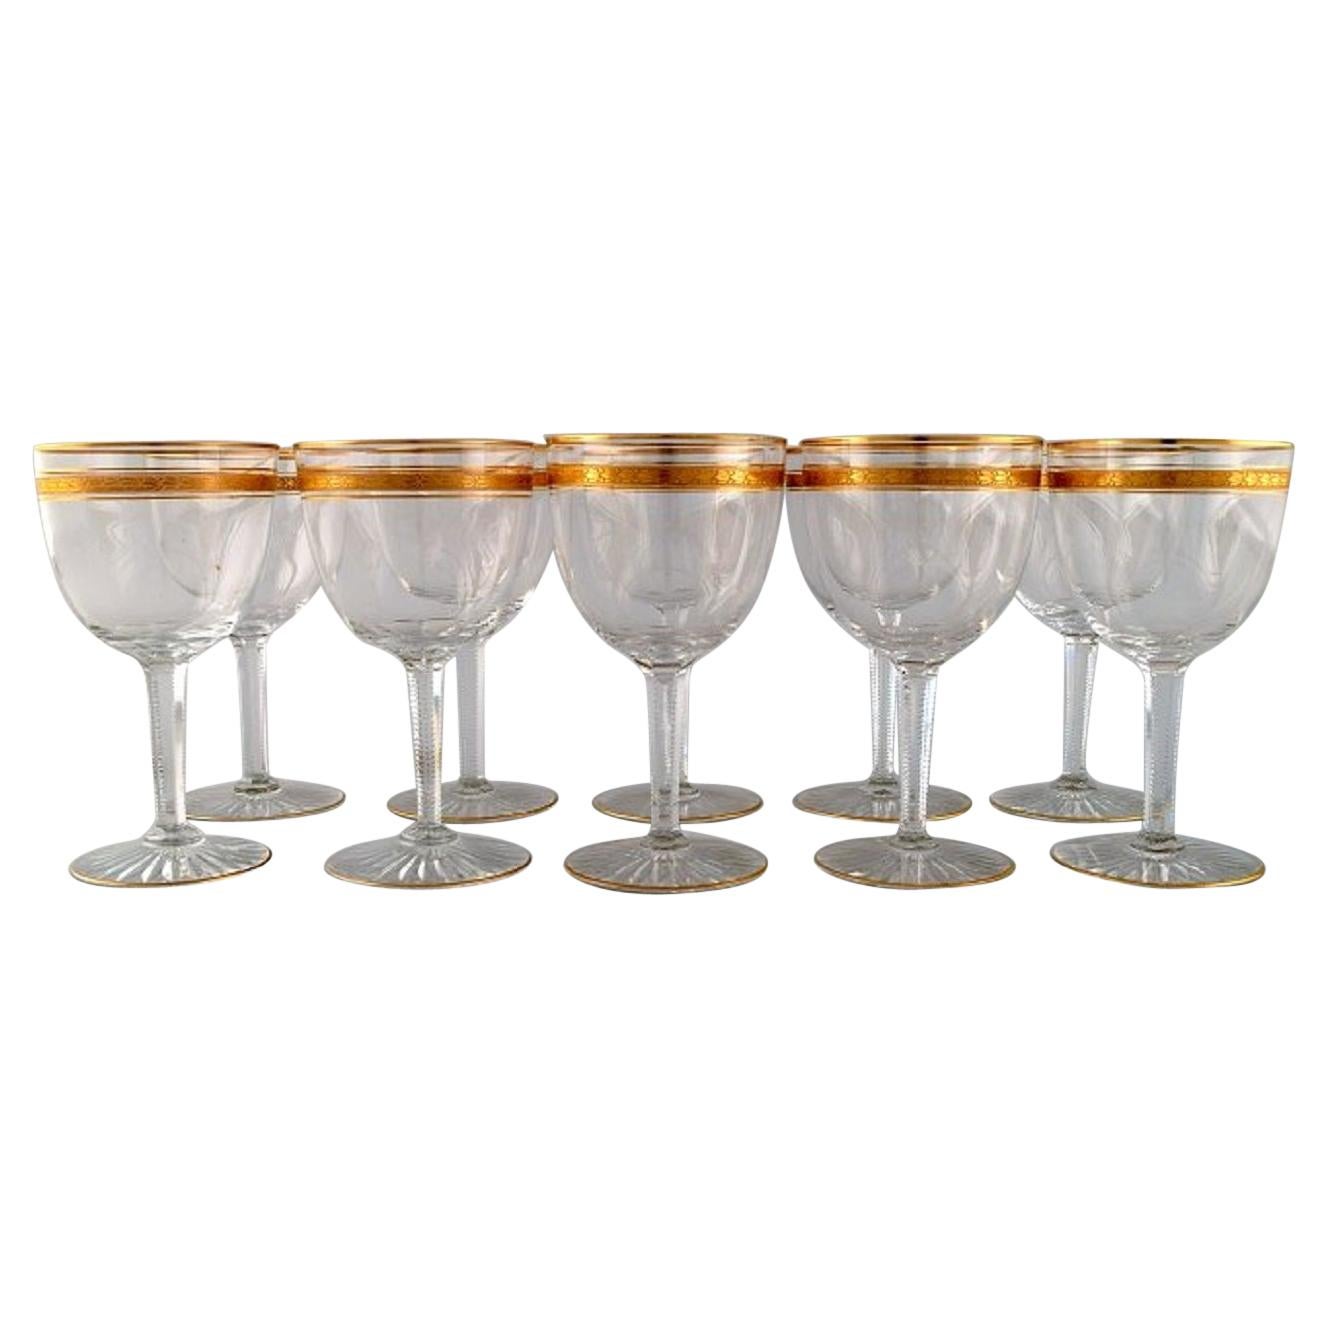 Baccarat, France, Ten Art Deco Red Wine Glasses in Crystal Glass, 1930s